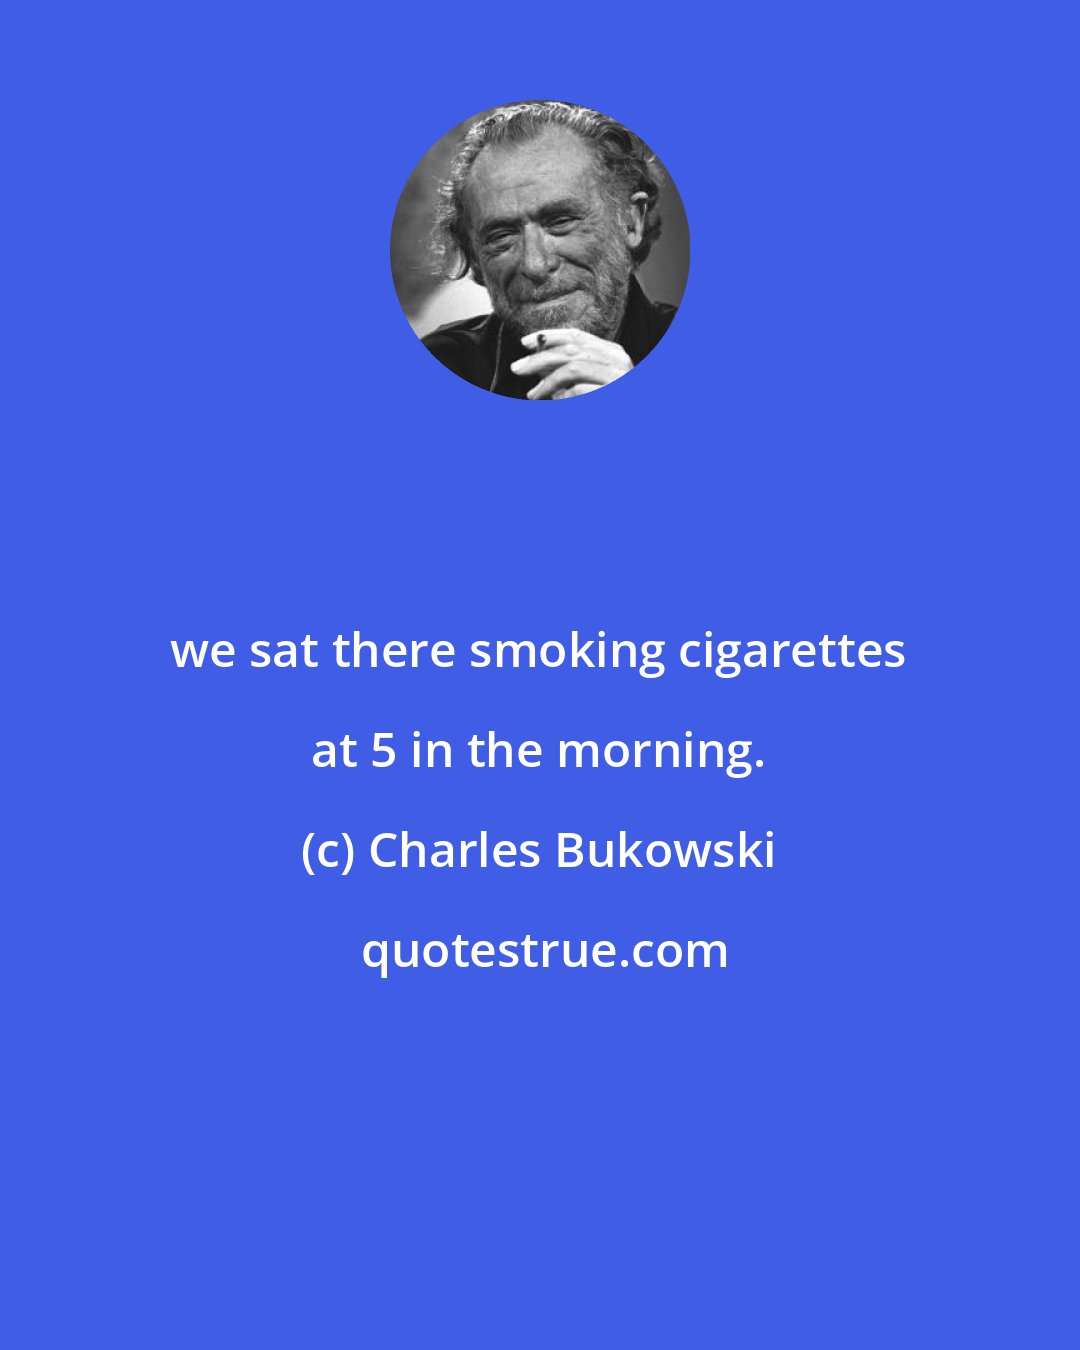 Charles Bukowski: we sat there smoking cigarettes at 5 in the morning.